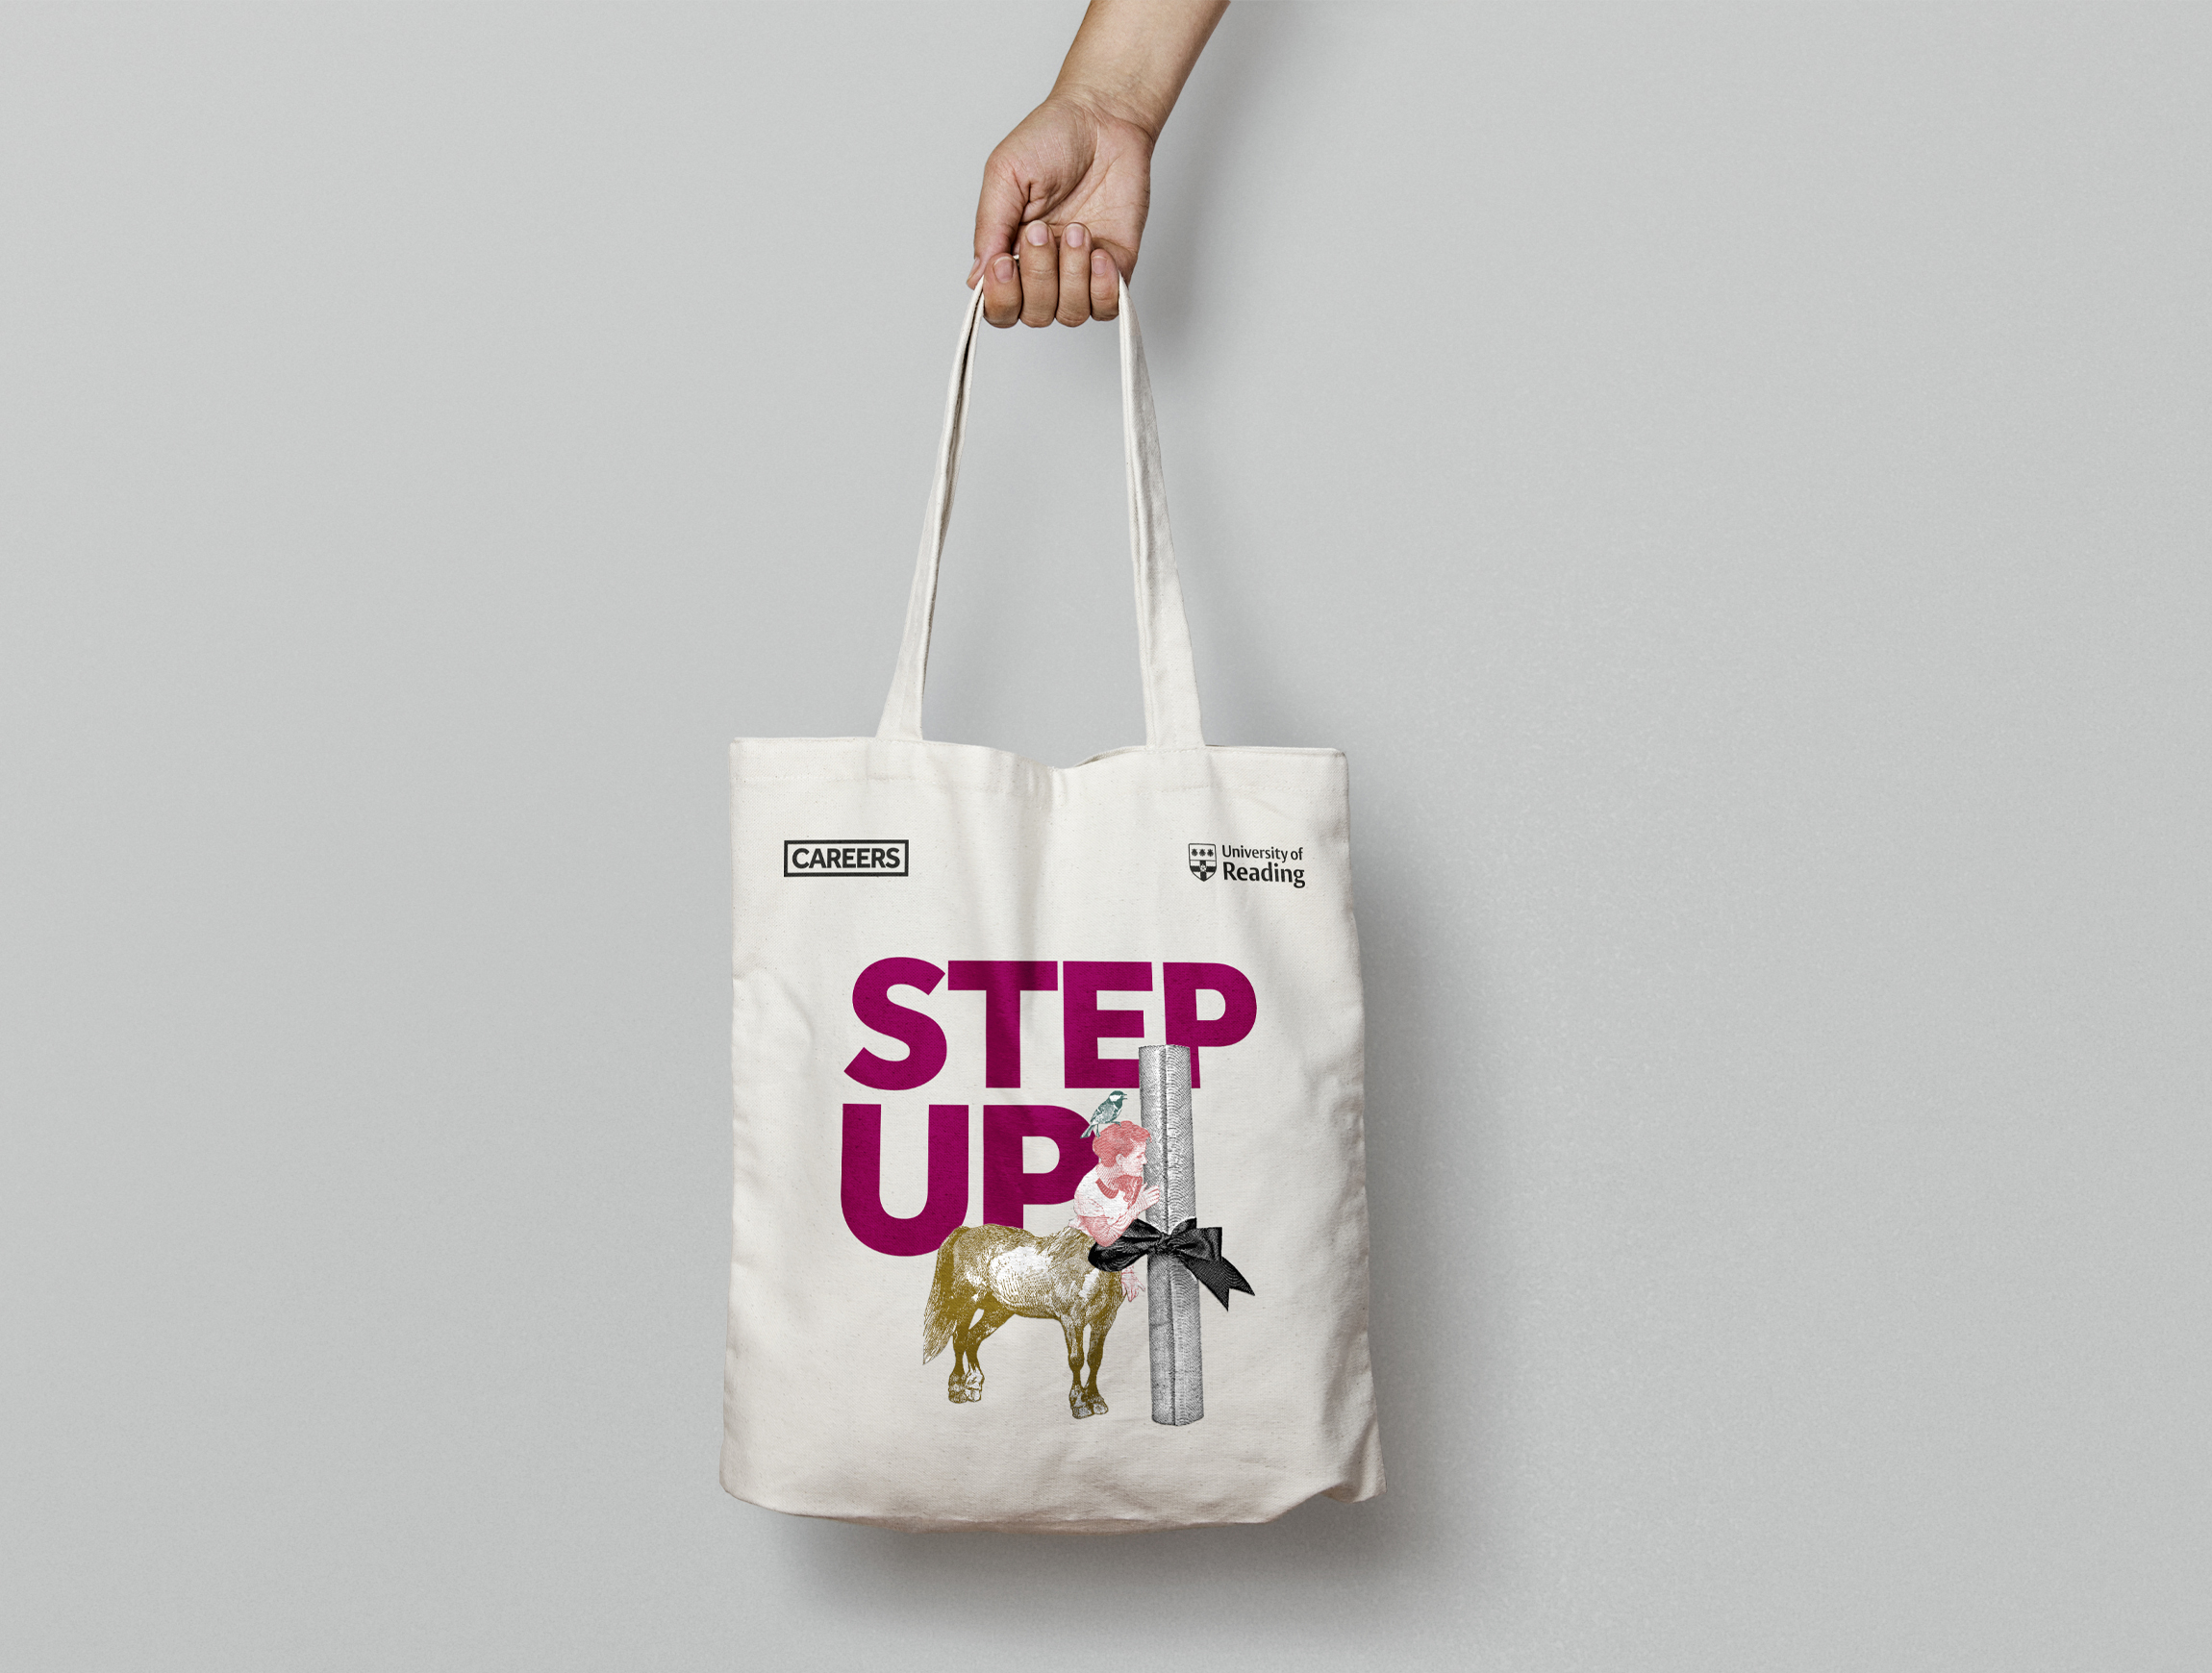 University of Reading Careers shown on tote bag